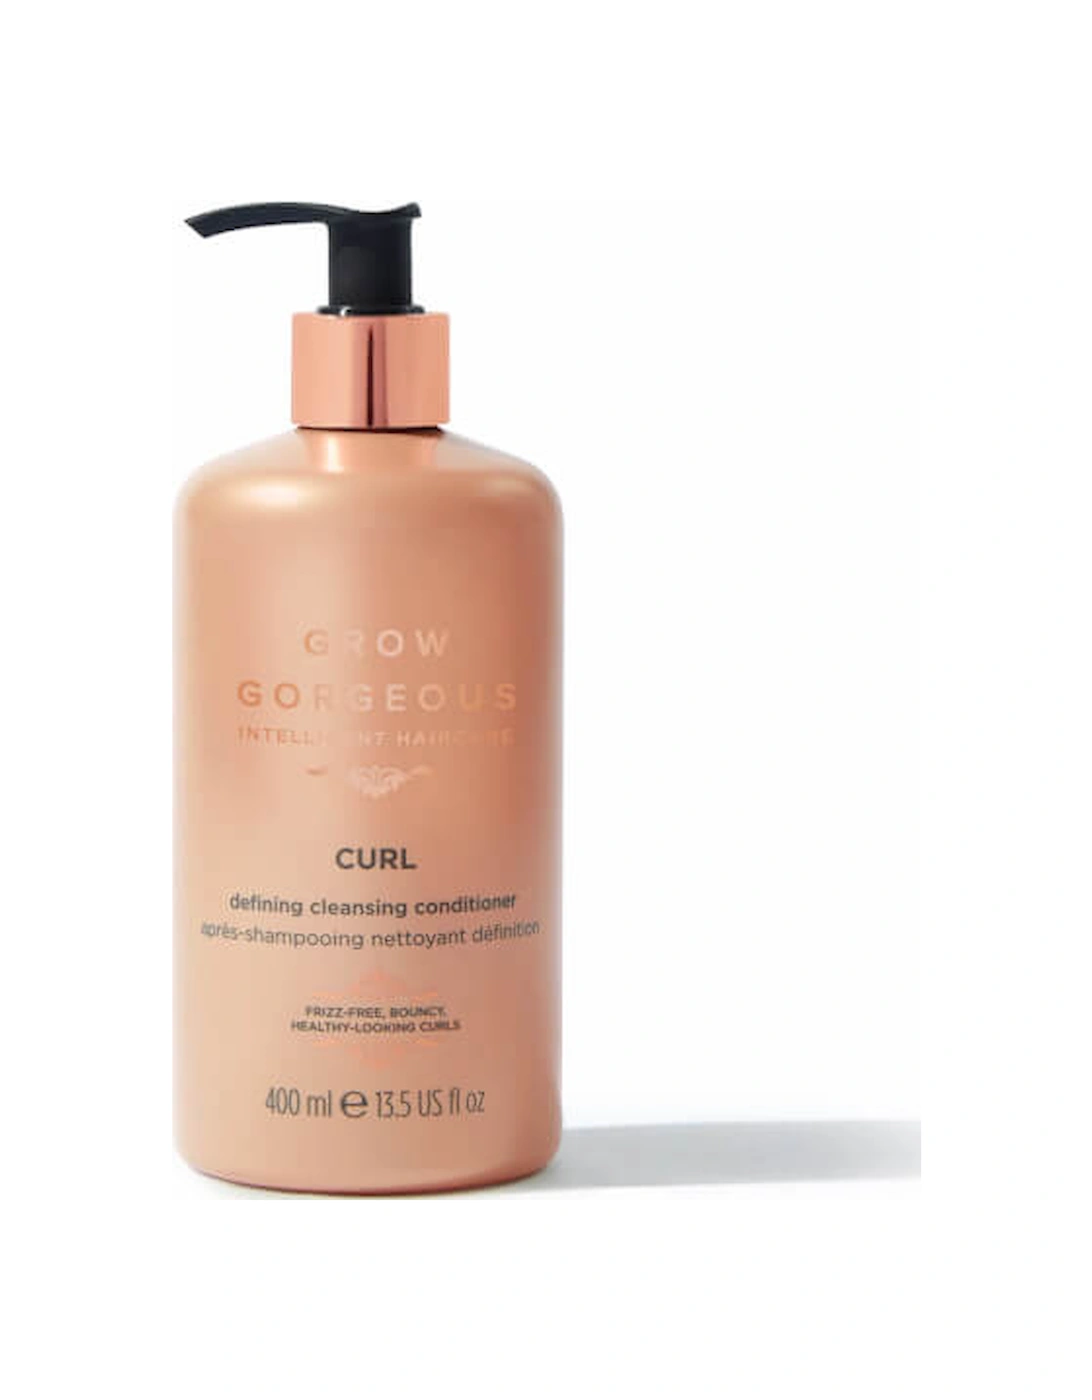 Curl Defining Cleansing Conditioner 400ml - Grow Gorgeous, 2 of 1